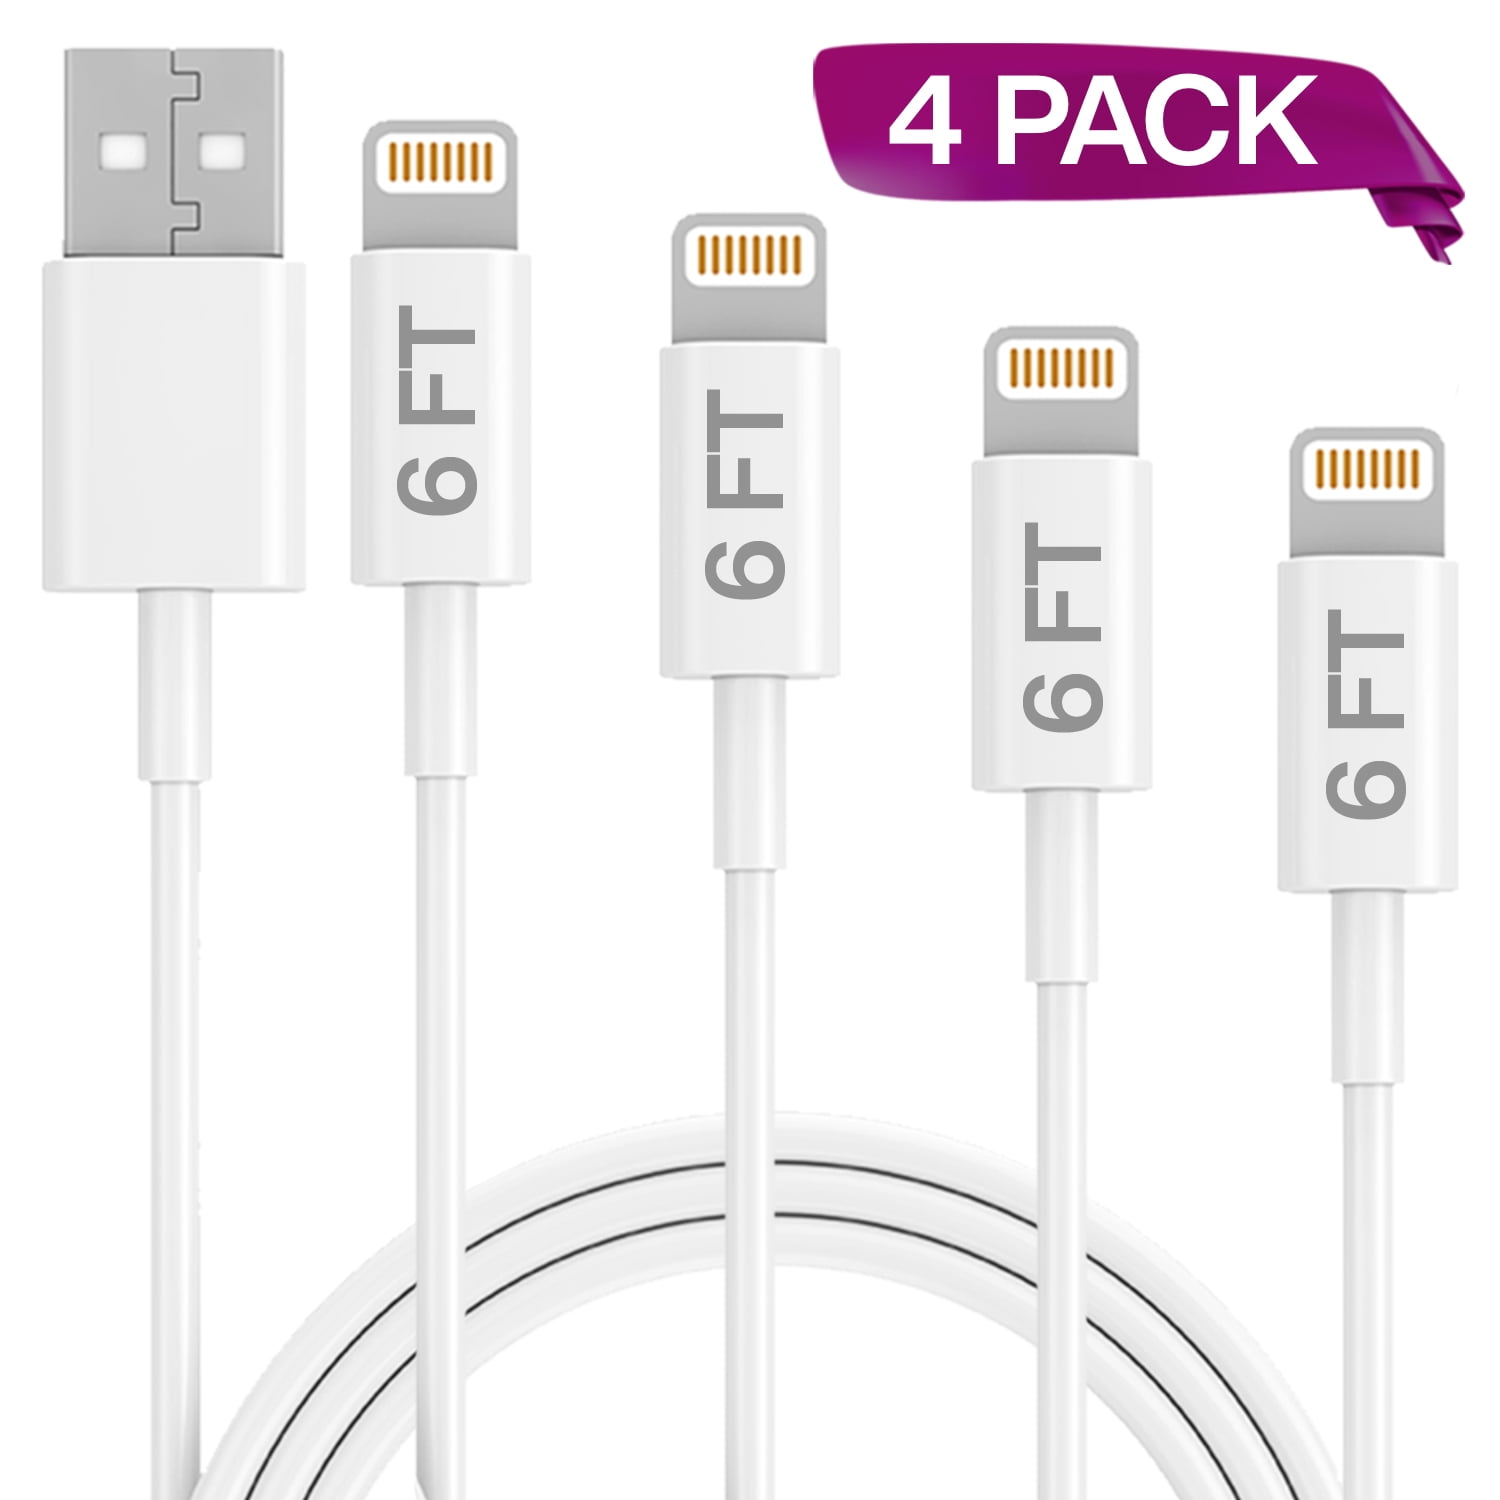 4 Pack Certified iPhone Charger Lightning Cable High Speed Nylon Braided USB Fast Charging&Data Syncs Cord Compatible iPhone 11 Pro Xs MAX XR 8 8 Plus 7 7 Plus 6s GreyBlack 3ft,6ft,6ft,10ft 